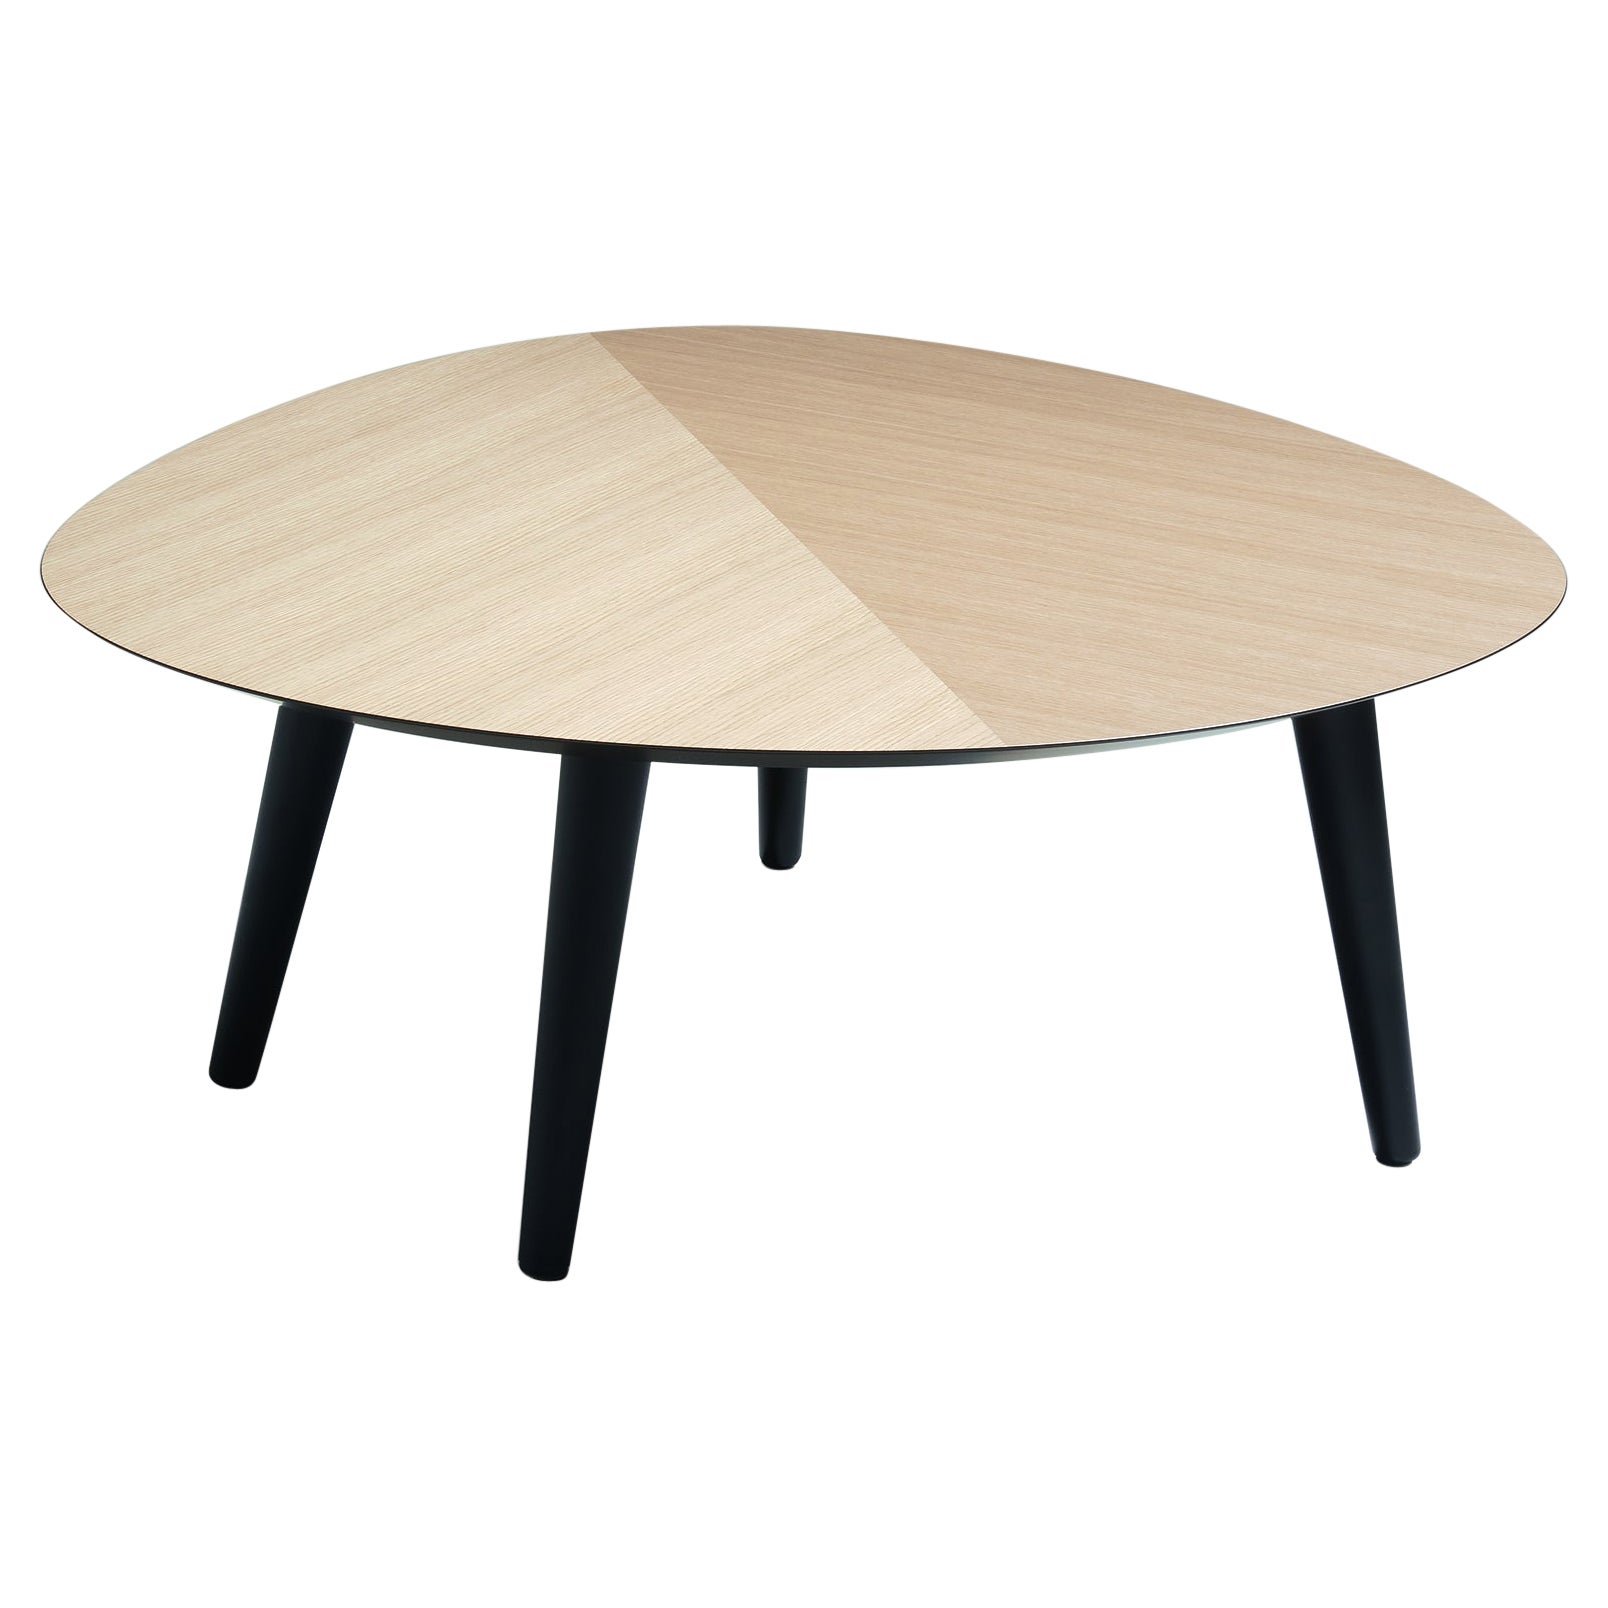 Zanotta Medium Tweed Mini Table in Natural Oak Top with Black Frame For Sale